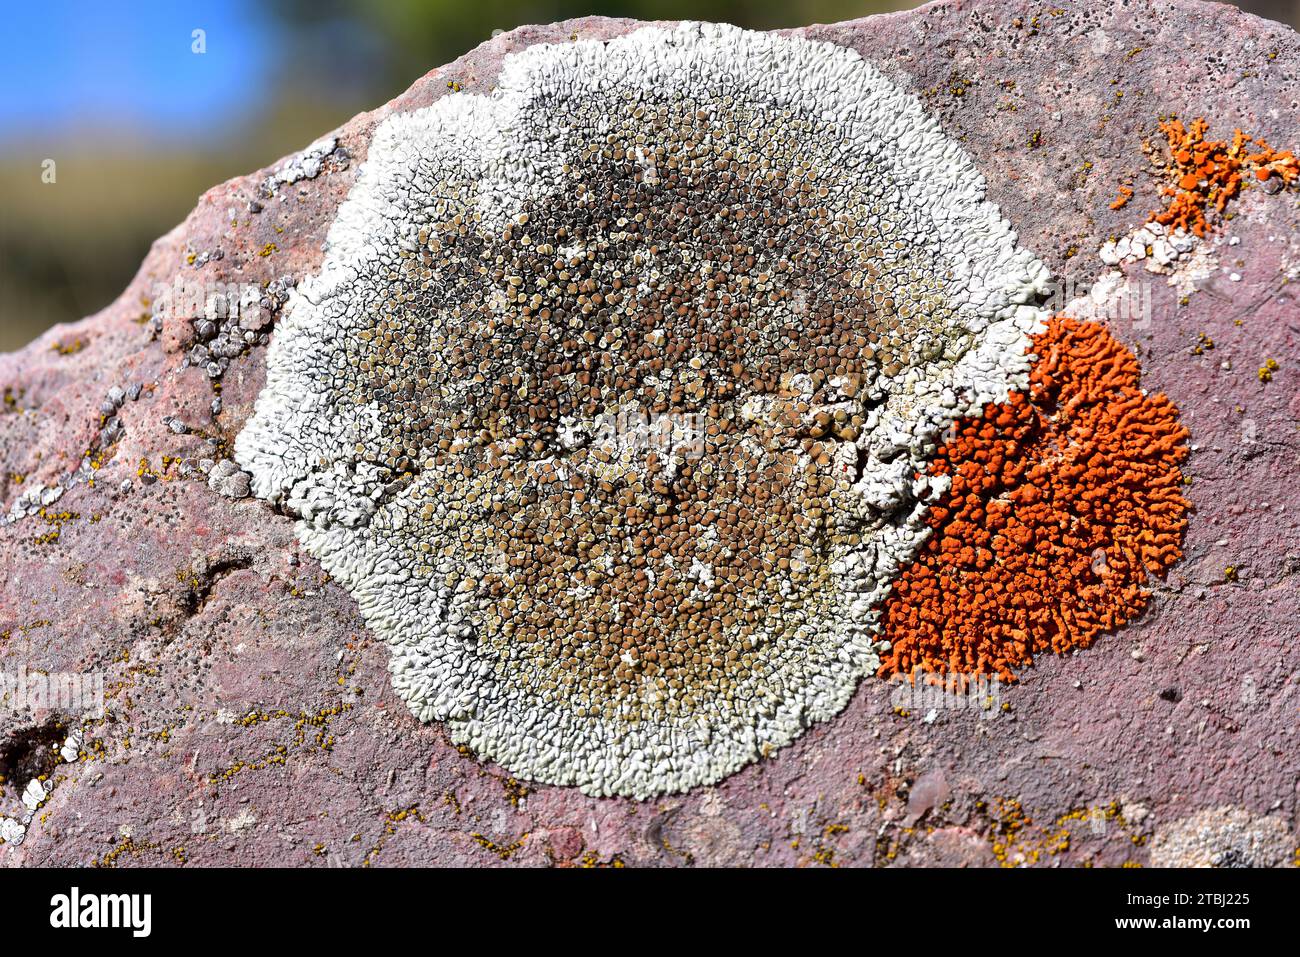 Lecanora muralis or Protoparmeliopsis muralis is a crustose lichen that grows on calcareous or siliceous rocks. At right Xanthoria elegans. This photo Stock Photo